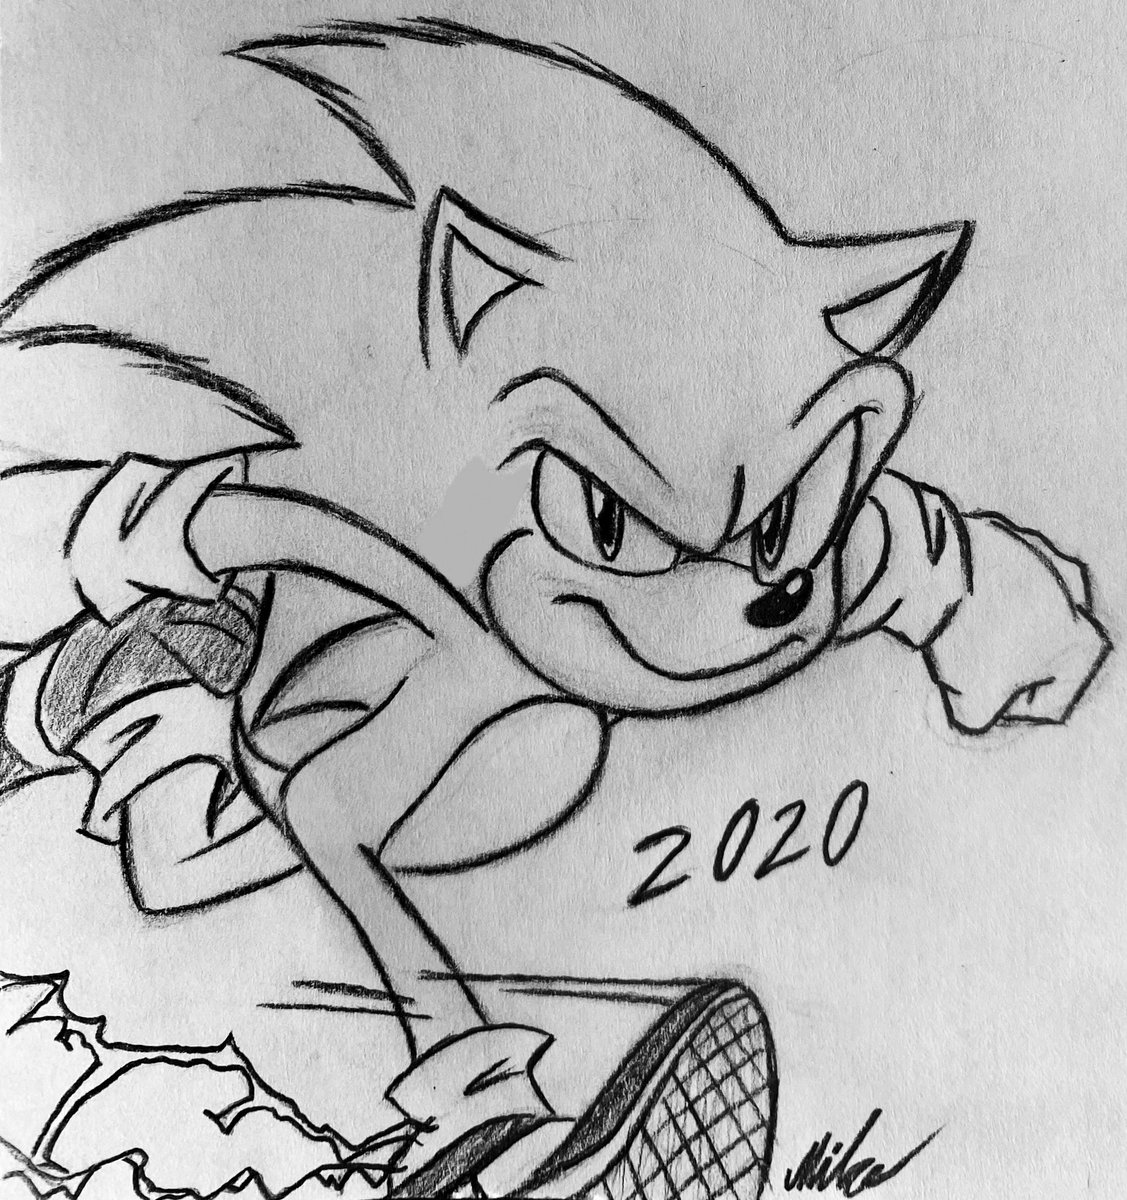 RT @supermilobros: Sonic the hedgehog, can’t believe it’s already been a whole year since the movie came out! https://t.co/bhaD2ZGBkI